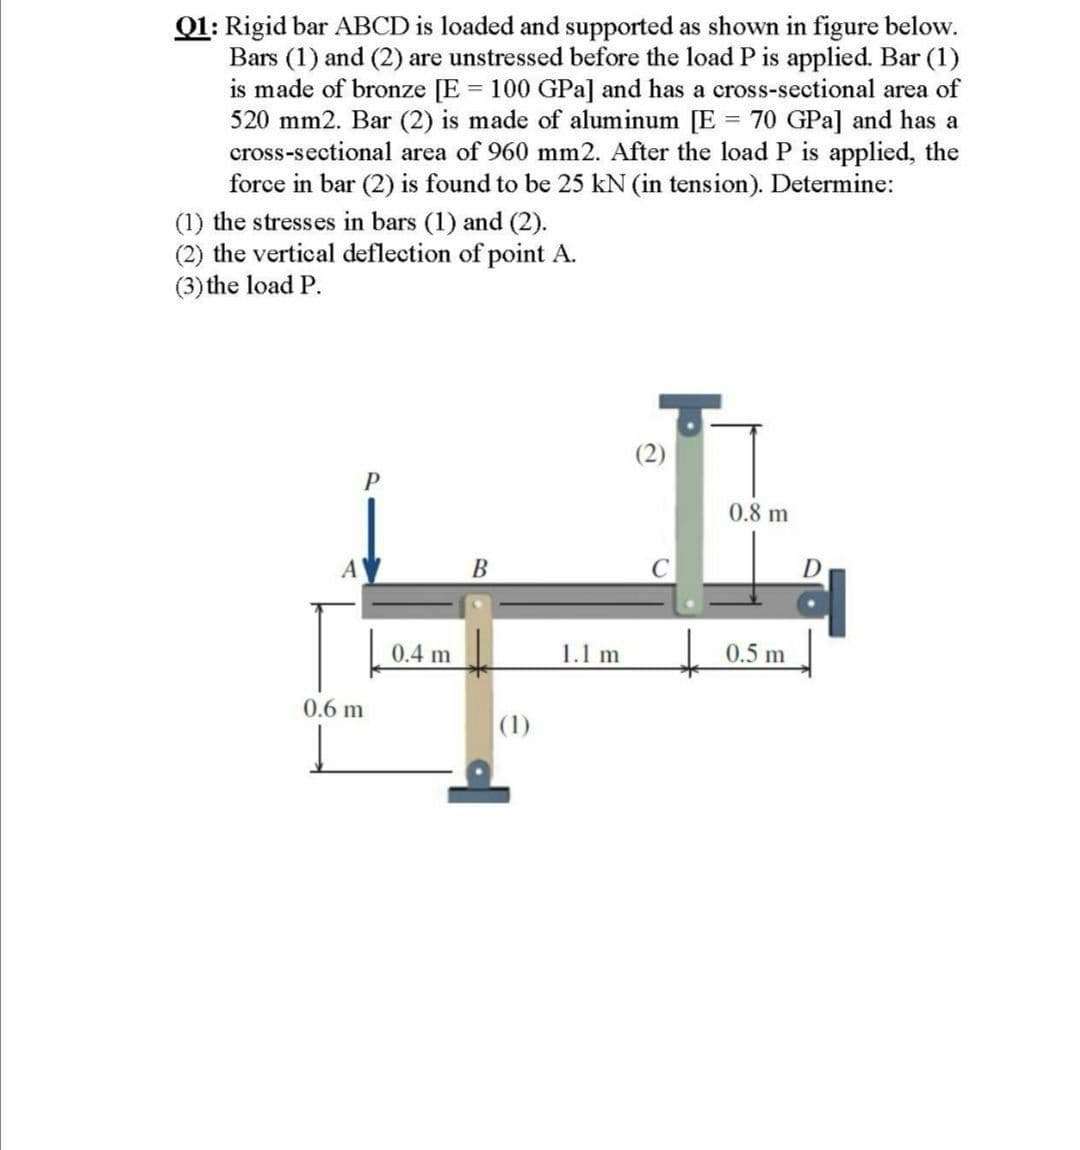 Q1: Rigid bar ABCD is loaded and supported as shown in figure below.
Bars (1) and (2) are unstressed before the load P is applied. Bar (1)
is made of bronze [E = 100 GPa] and has a cross-sectional area of
520 mm2. Bar (2) is made of aluminum [E = 70 GPa] and has a
cross-sectional area of 960 mm2. After the load P is applied, the
force in bar (2) is found to be 25 kN (in tension). Determine:
(1) the stresses in bars (1) and (2).
(2) the vertical deflection of point A.
(3) the load P.
0.8 m
A
В
0.4 m
1.1 m
I 0.5 m
0.6 m
